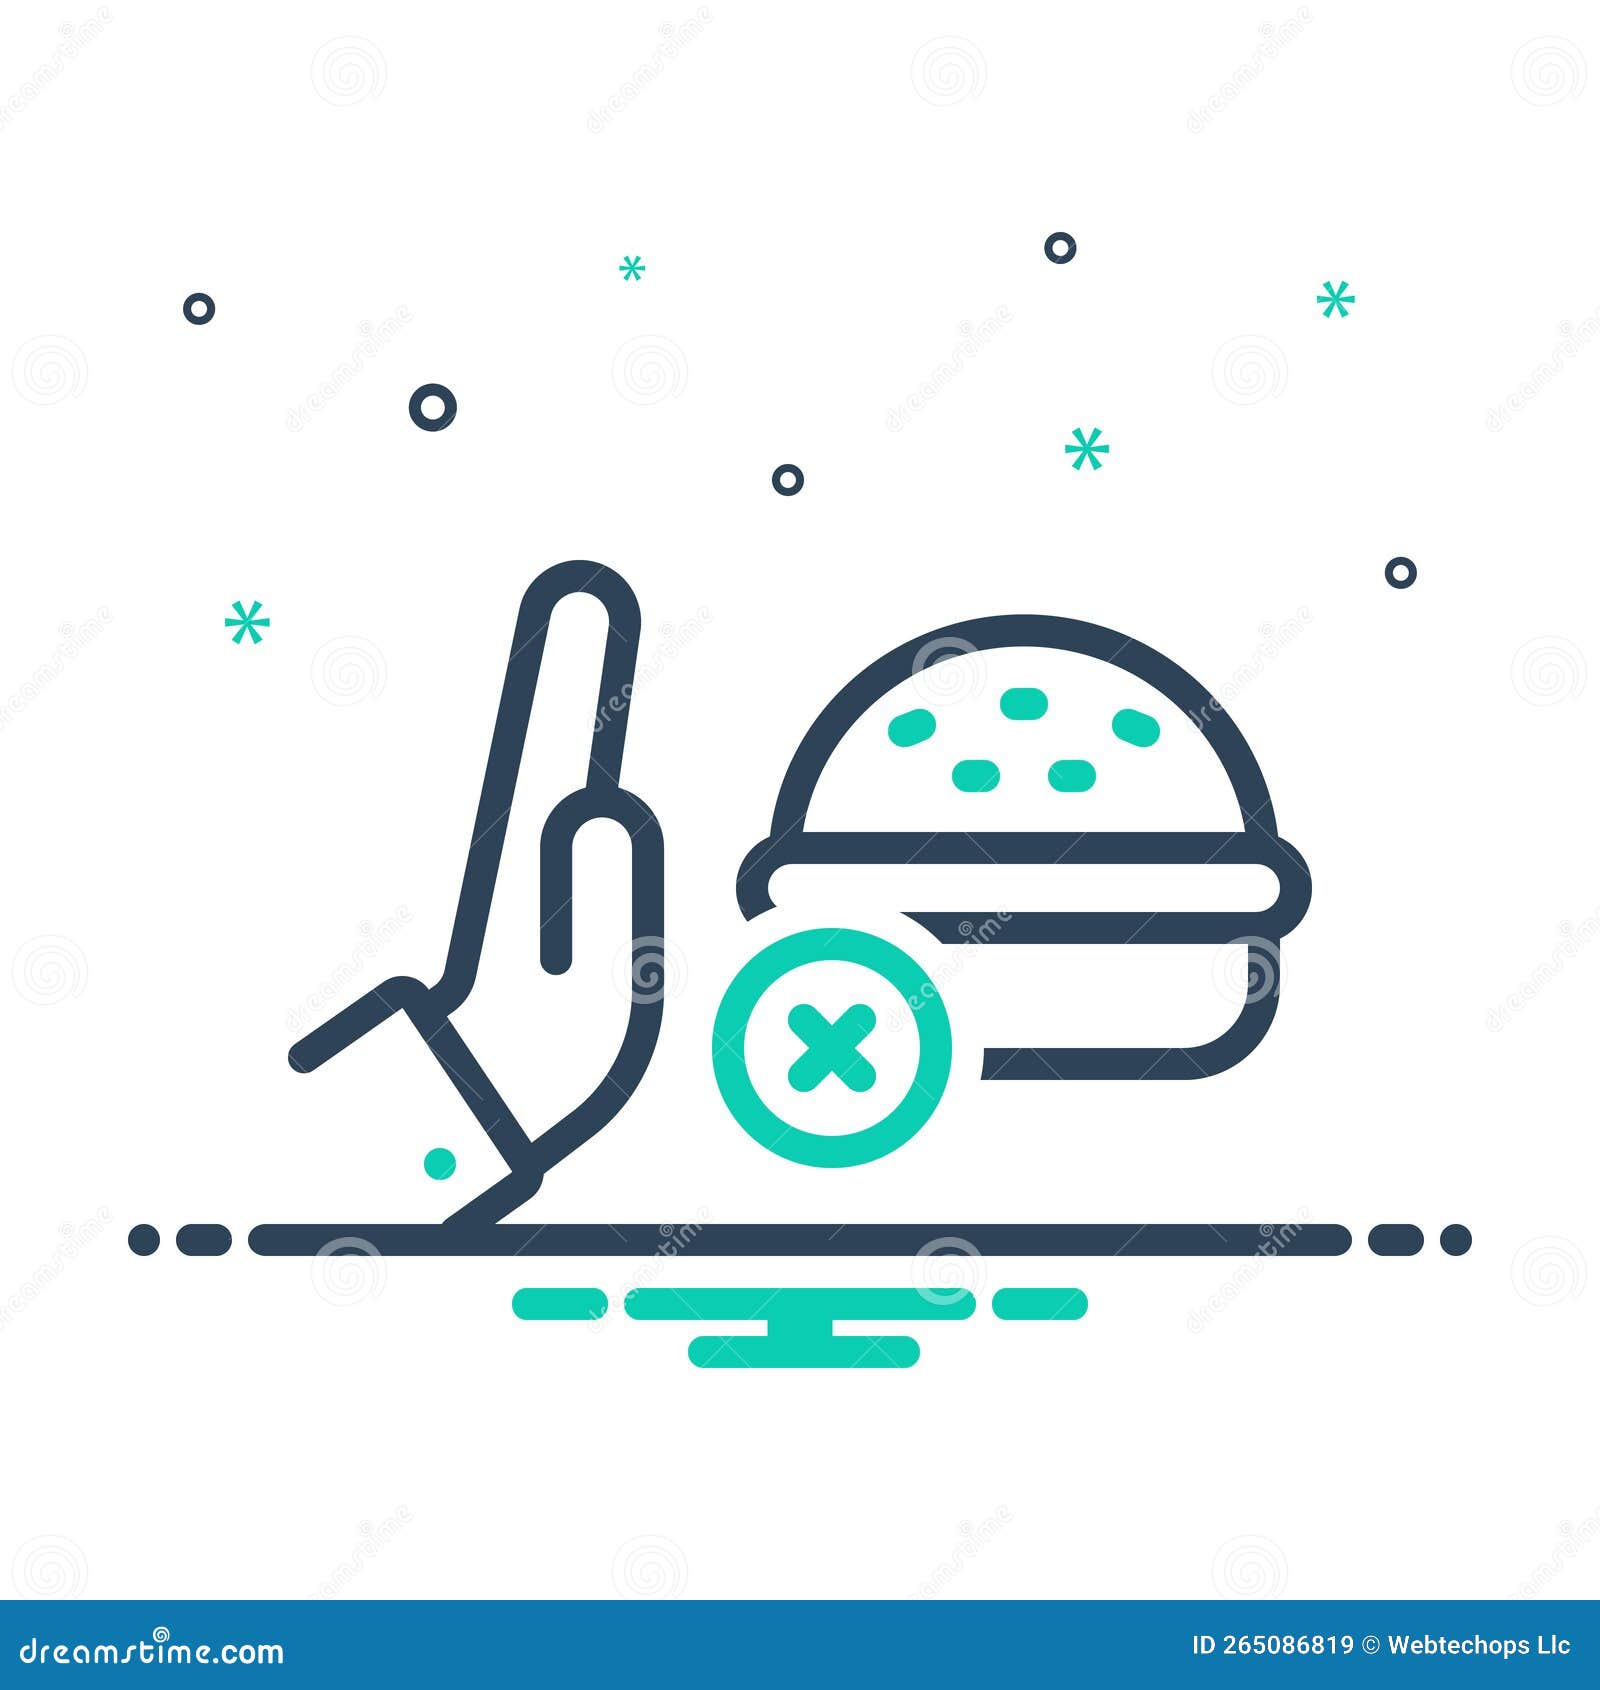 mix icon for remembered, burger and cross